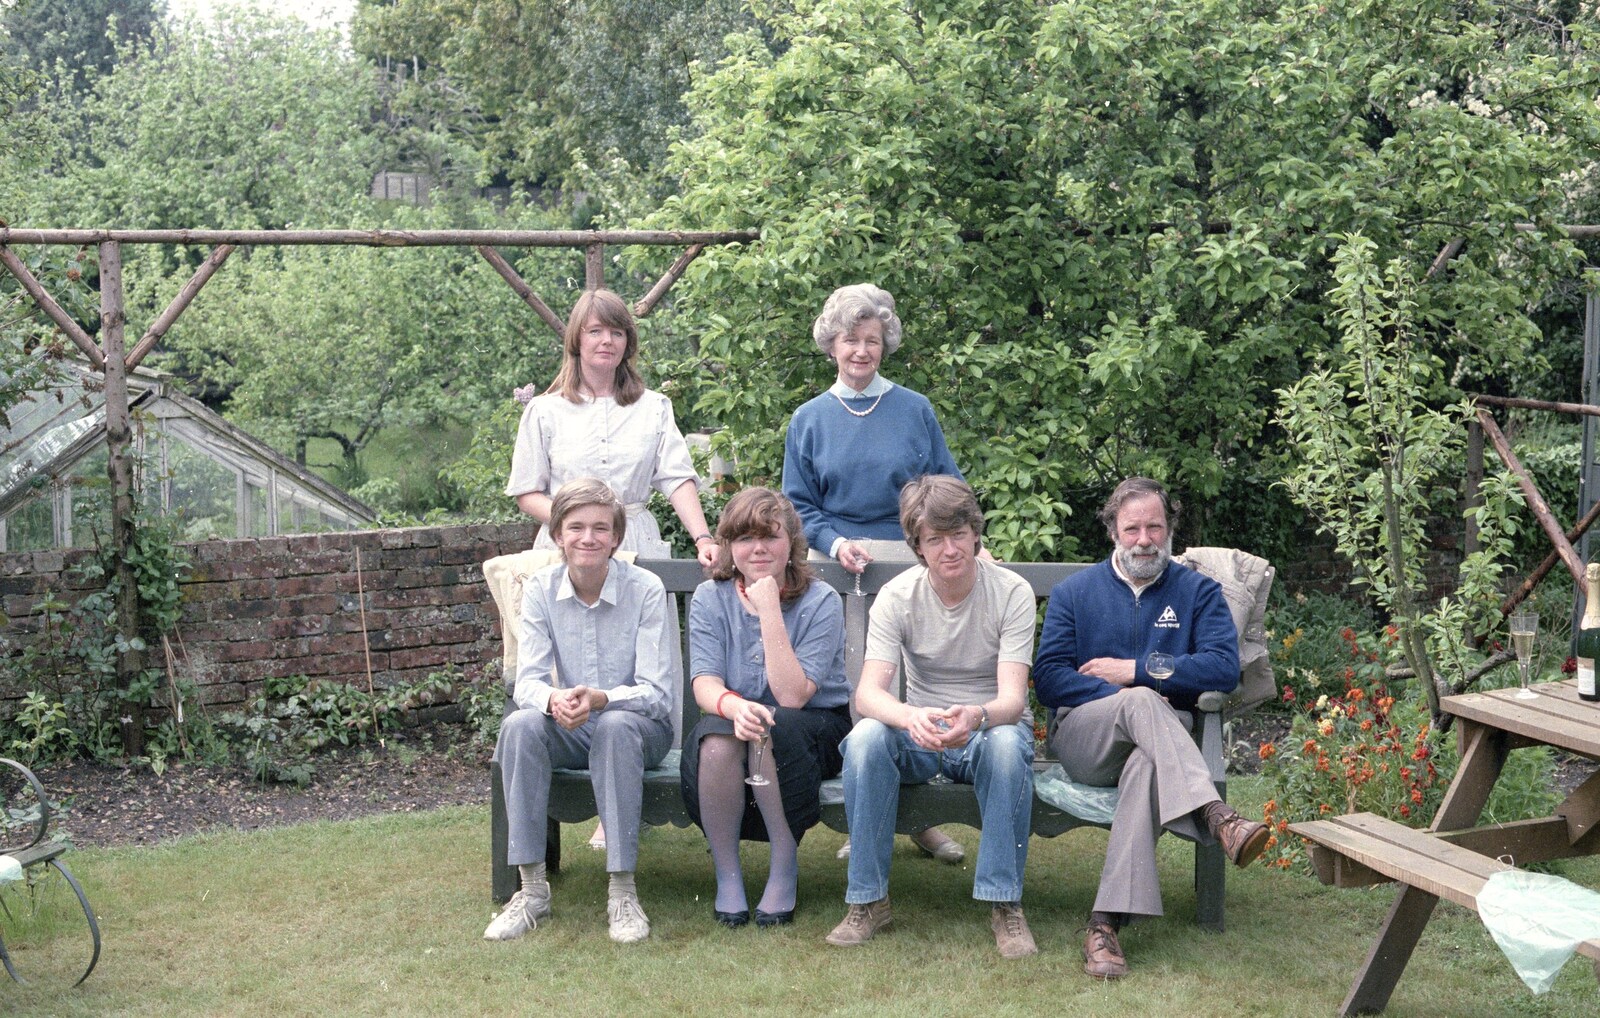 Nosher's 18th Birthday, Barton on Sea, Hampshire - 26th May 1985: Nosher in the family group photo